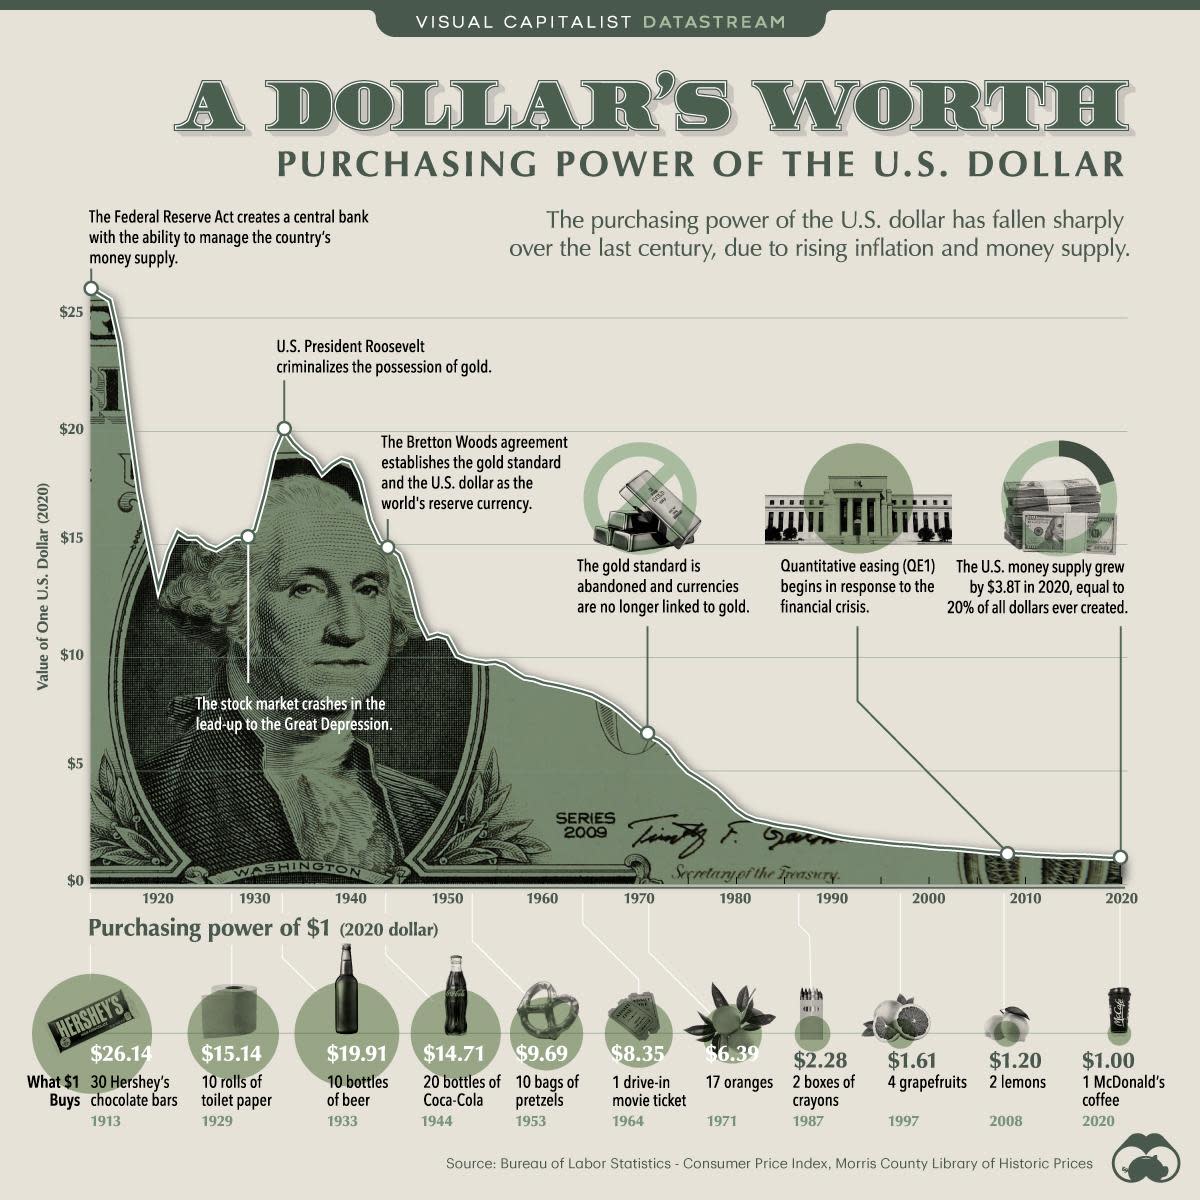 Purchasing-Power-of-the-U.S.-Dollar-Over-Time